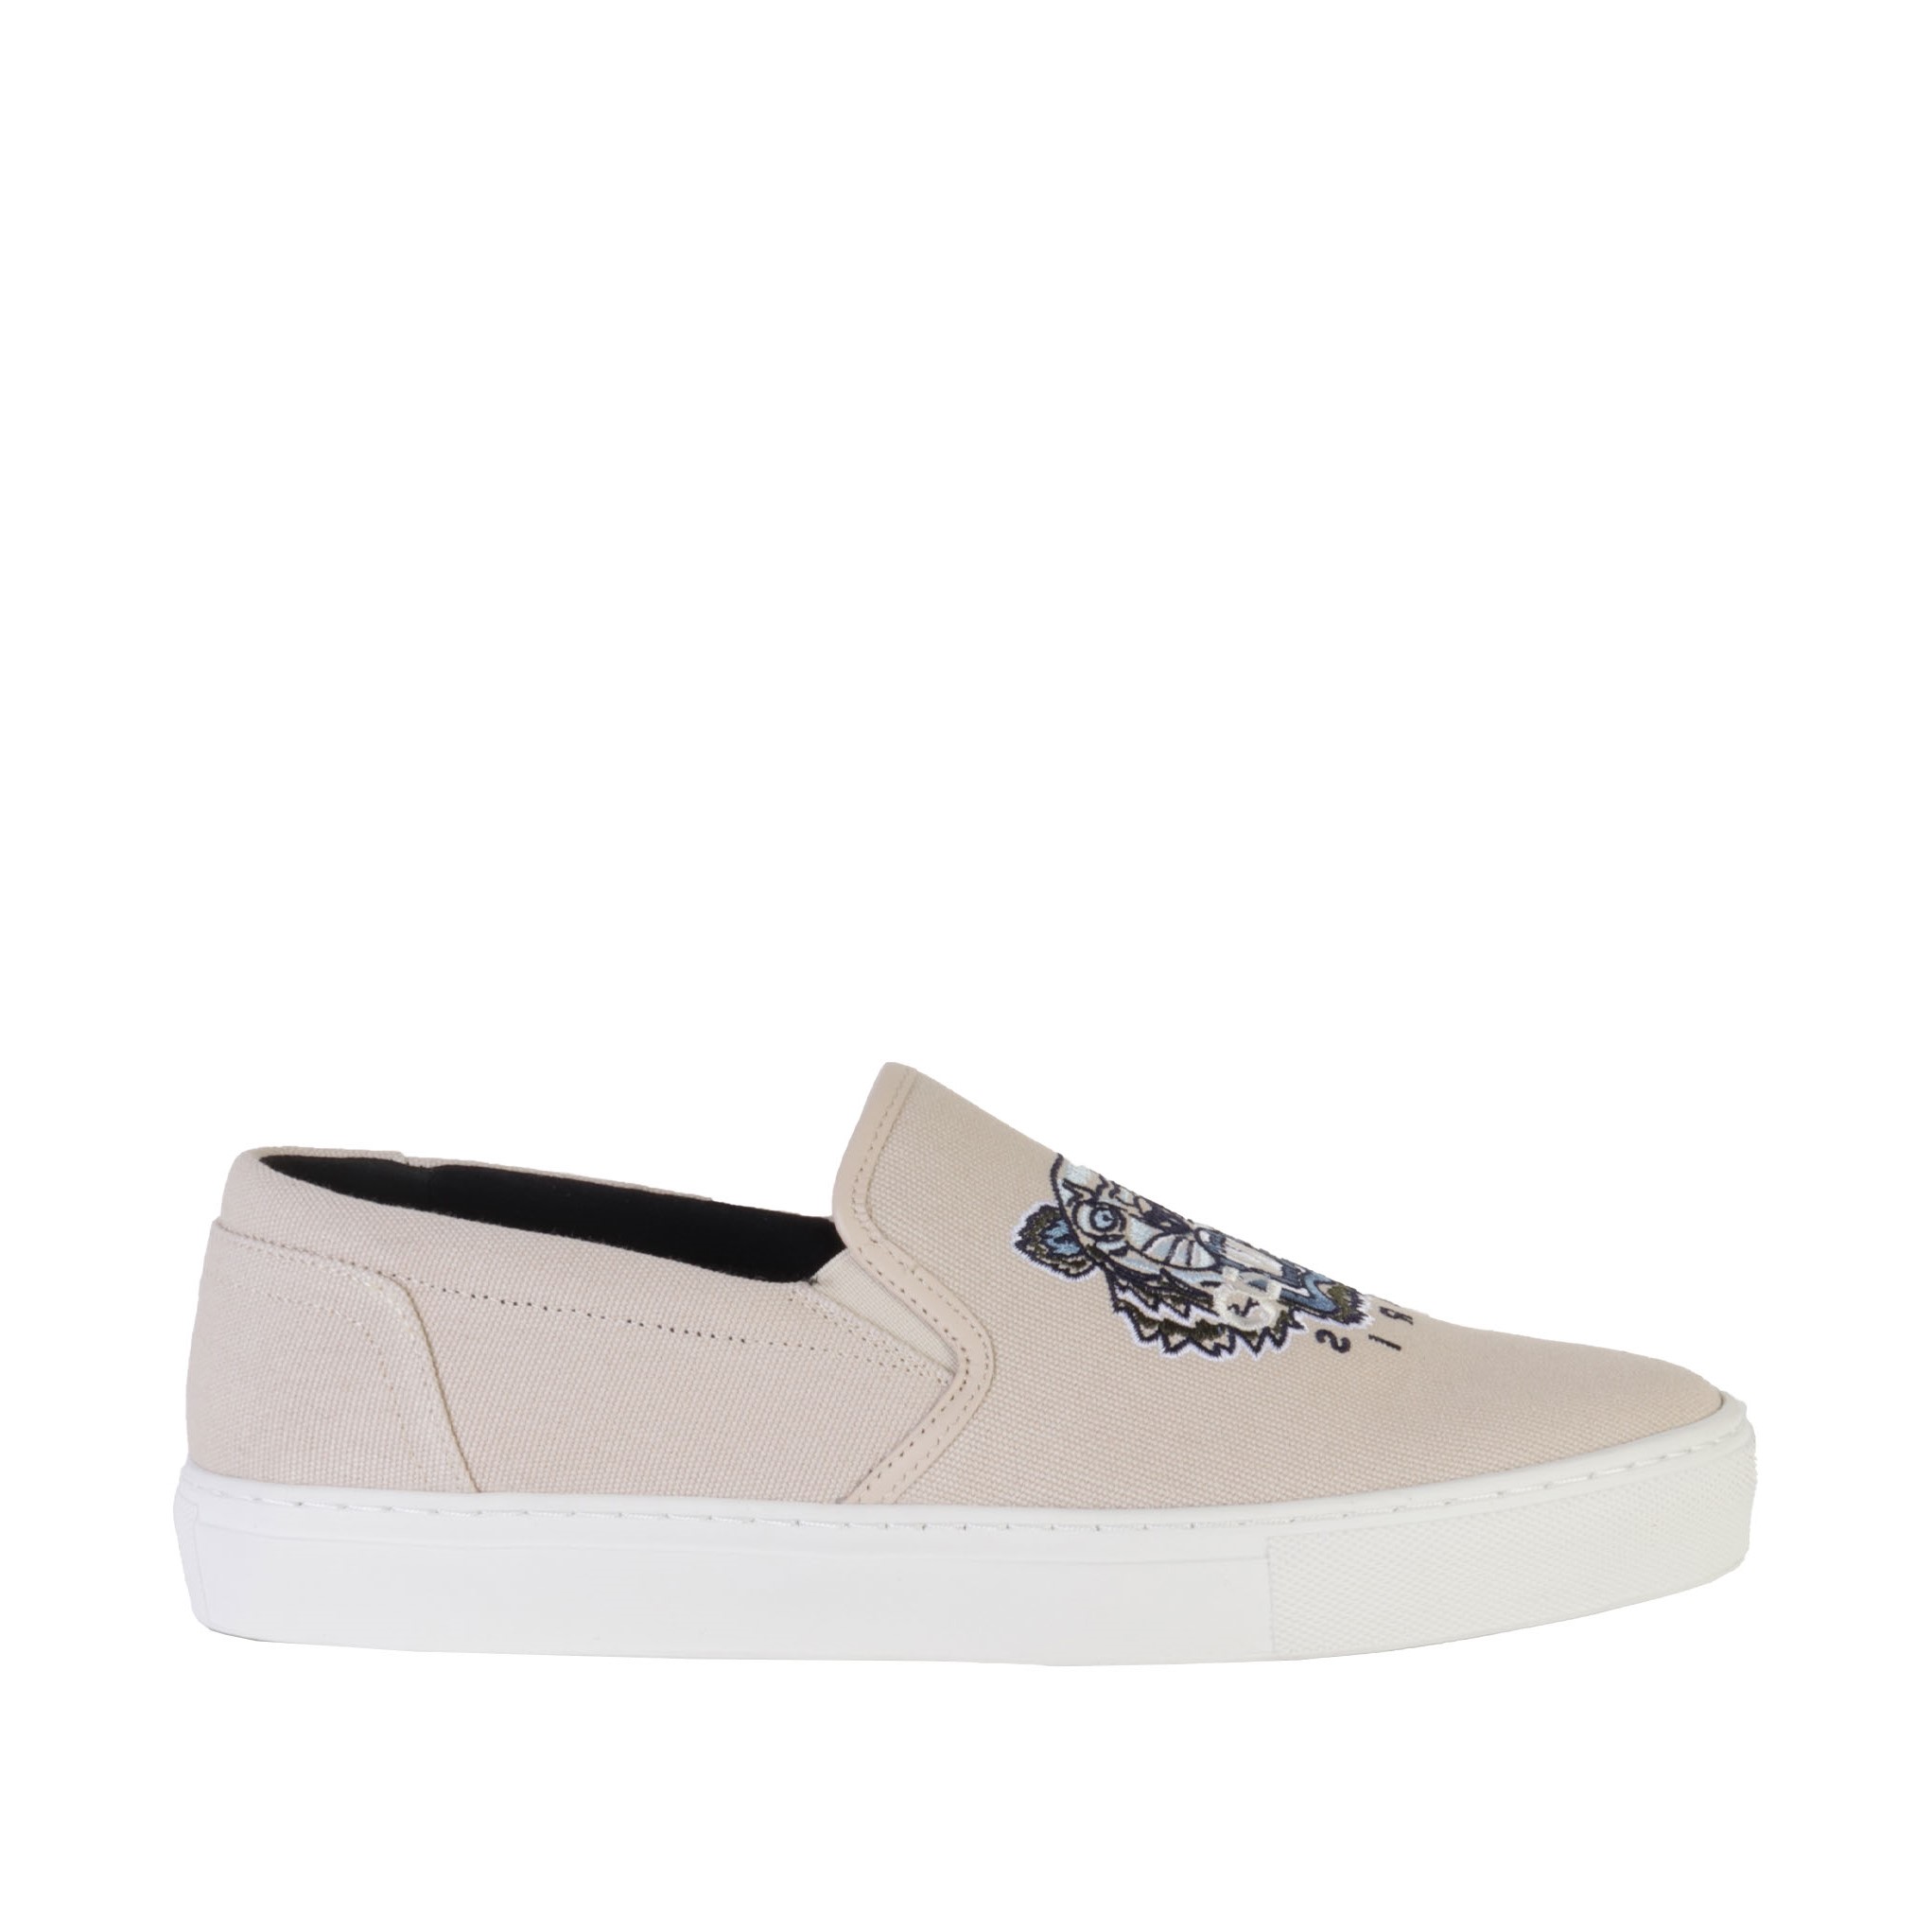 Kenzo Tiger Slip-On Sneakers • Fashion Brands Outlet